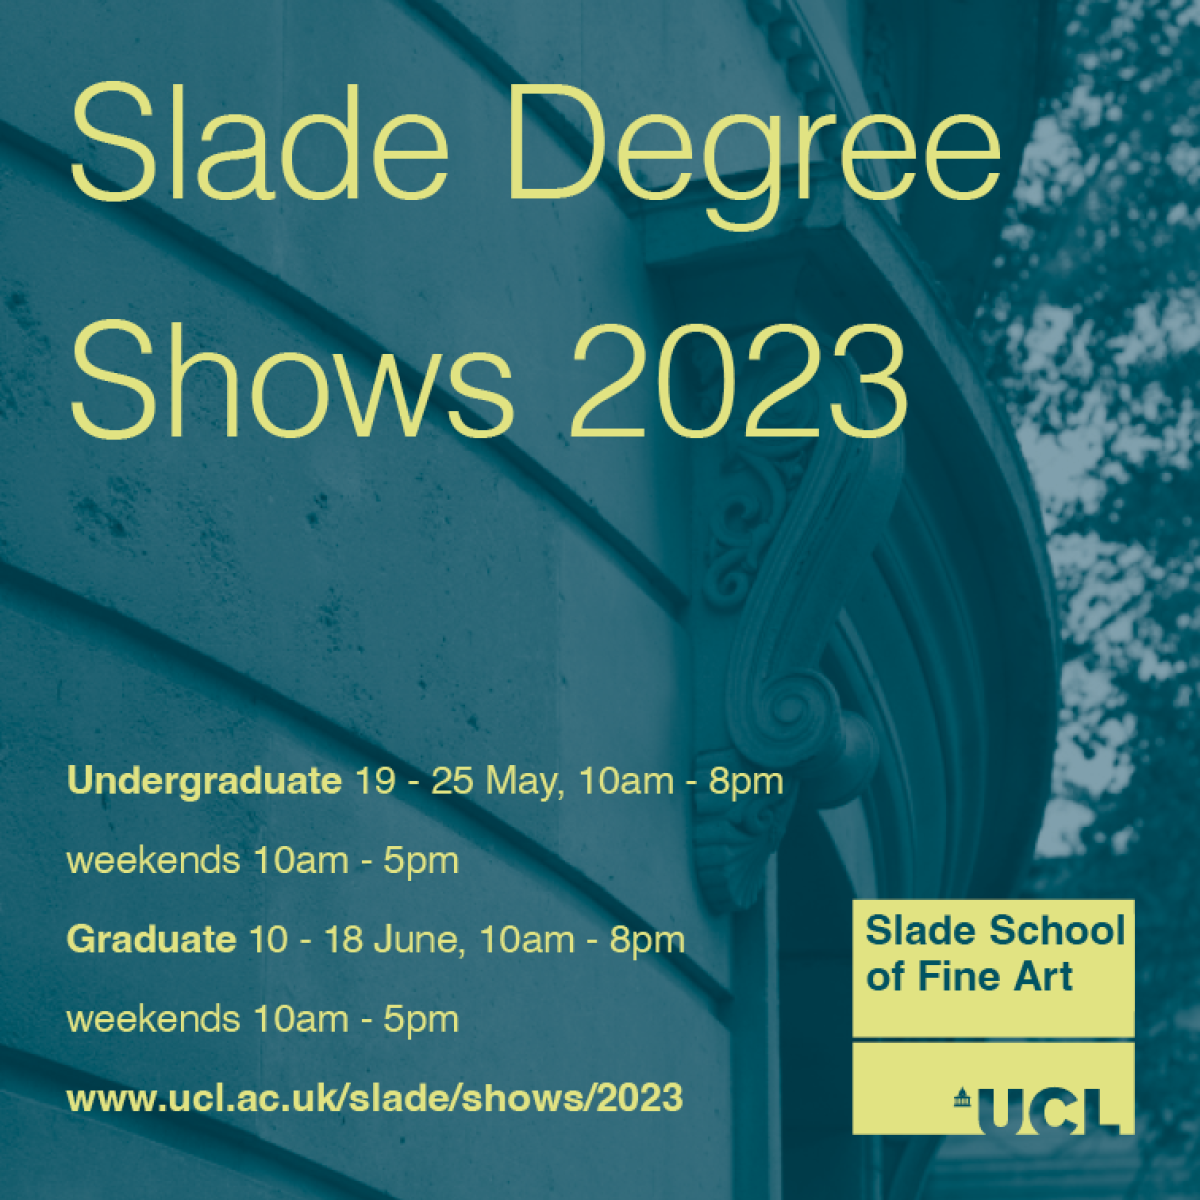 Slade Degree Shows 2023 poster